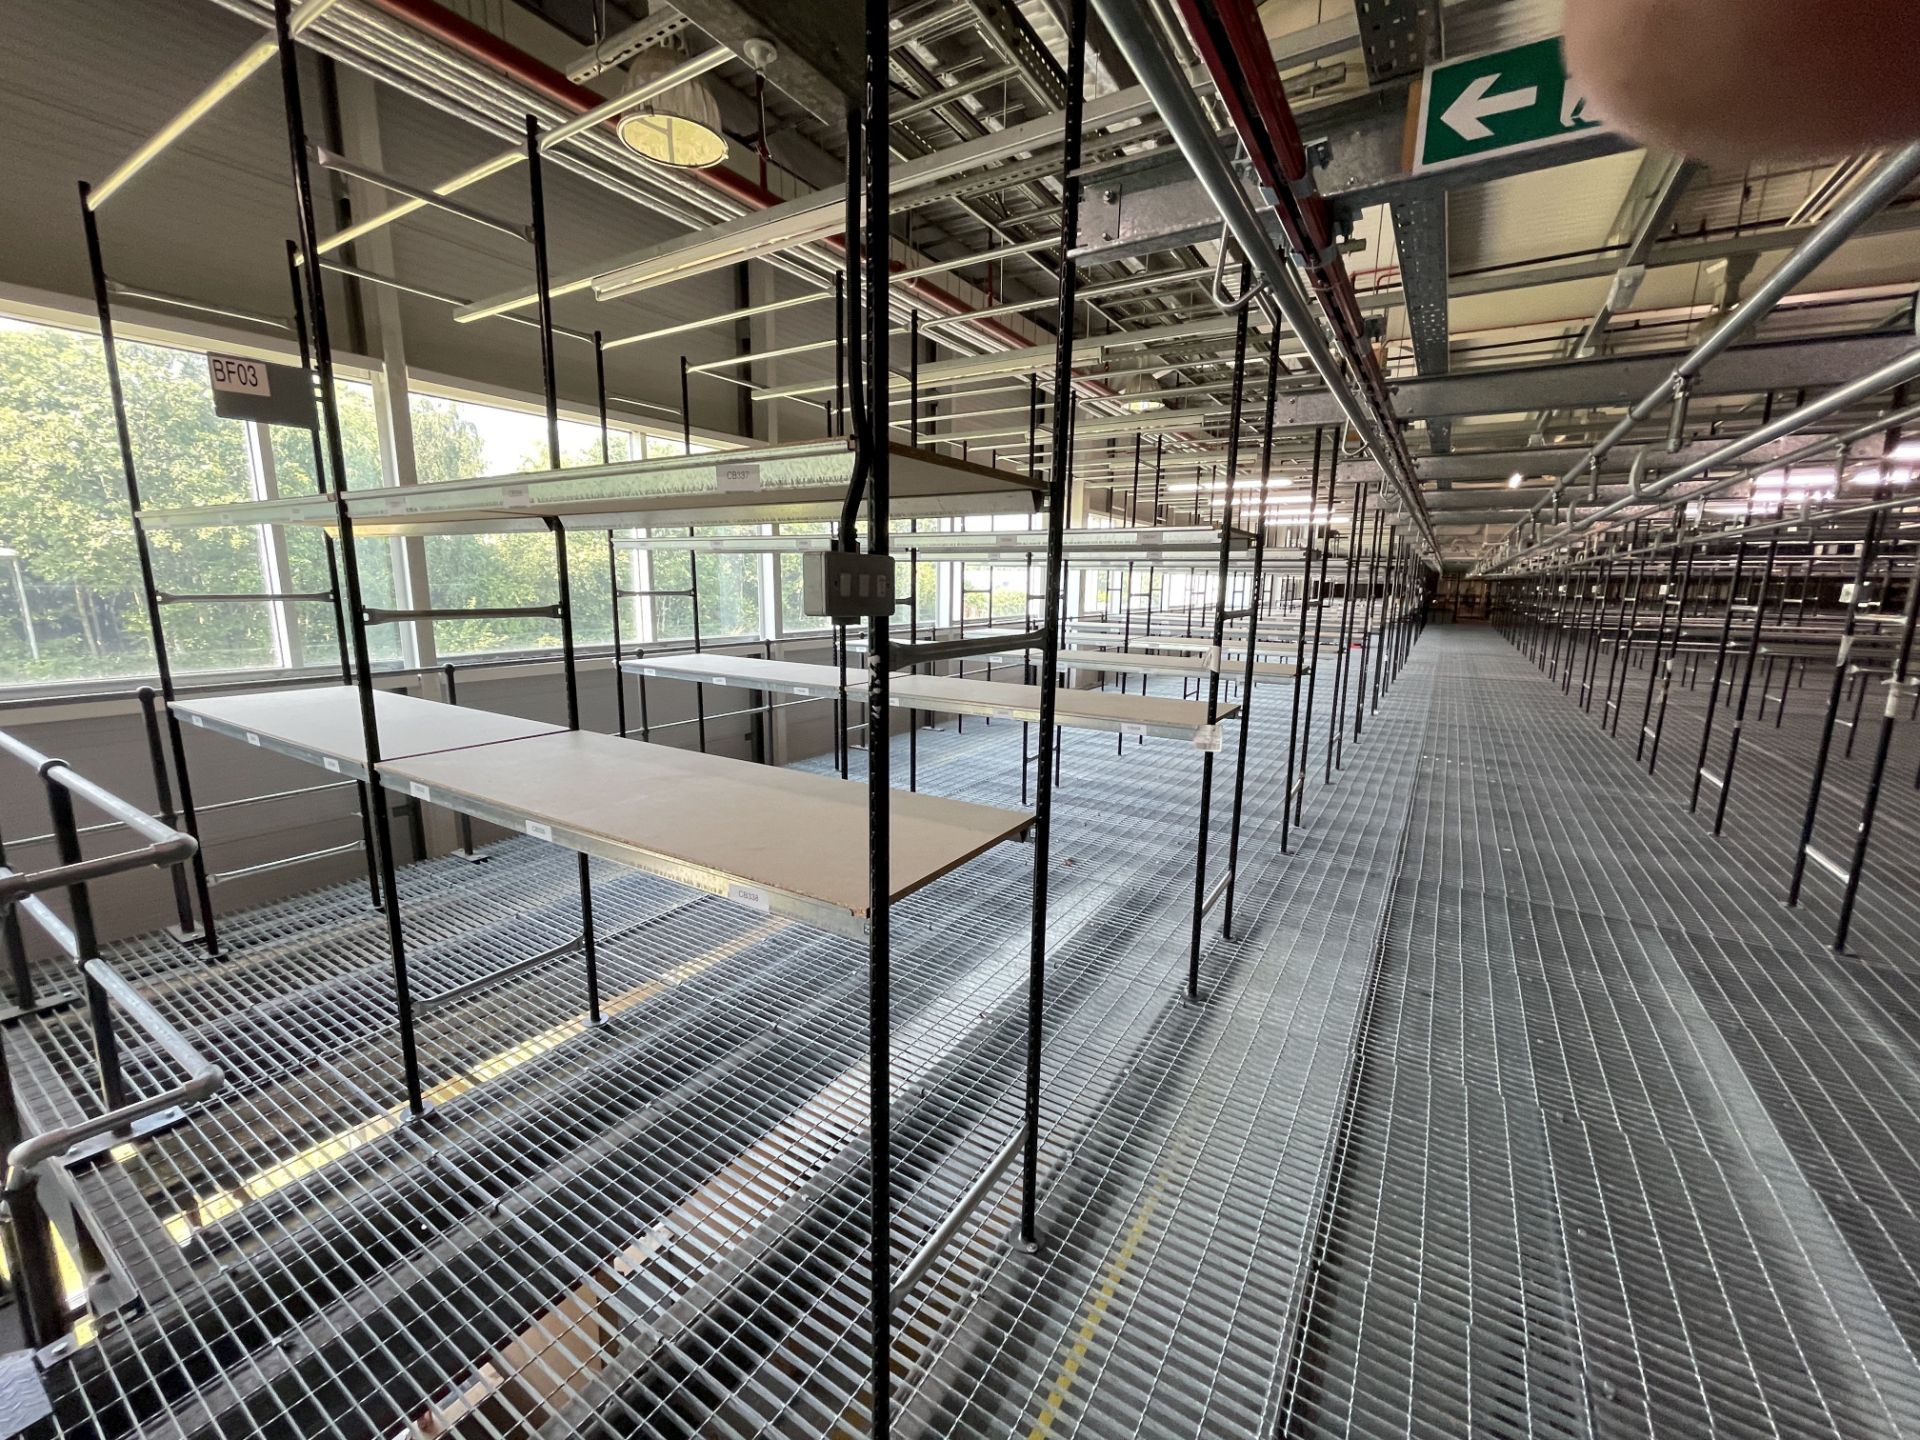 BOLTLESS STEEL SUSPENDED GARMENT STORAGE RACKING (on top of mezzanine floor), comprising approx. - Image 3 of 9